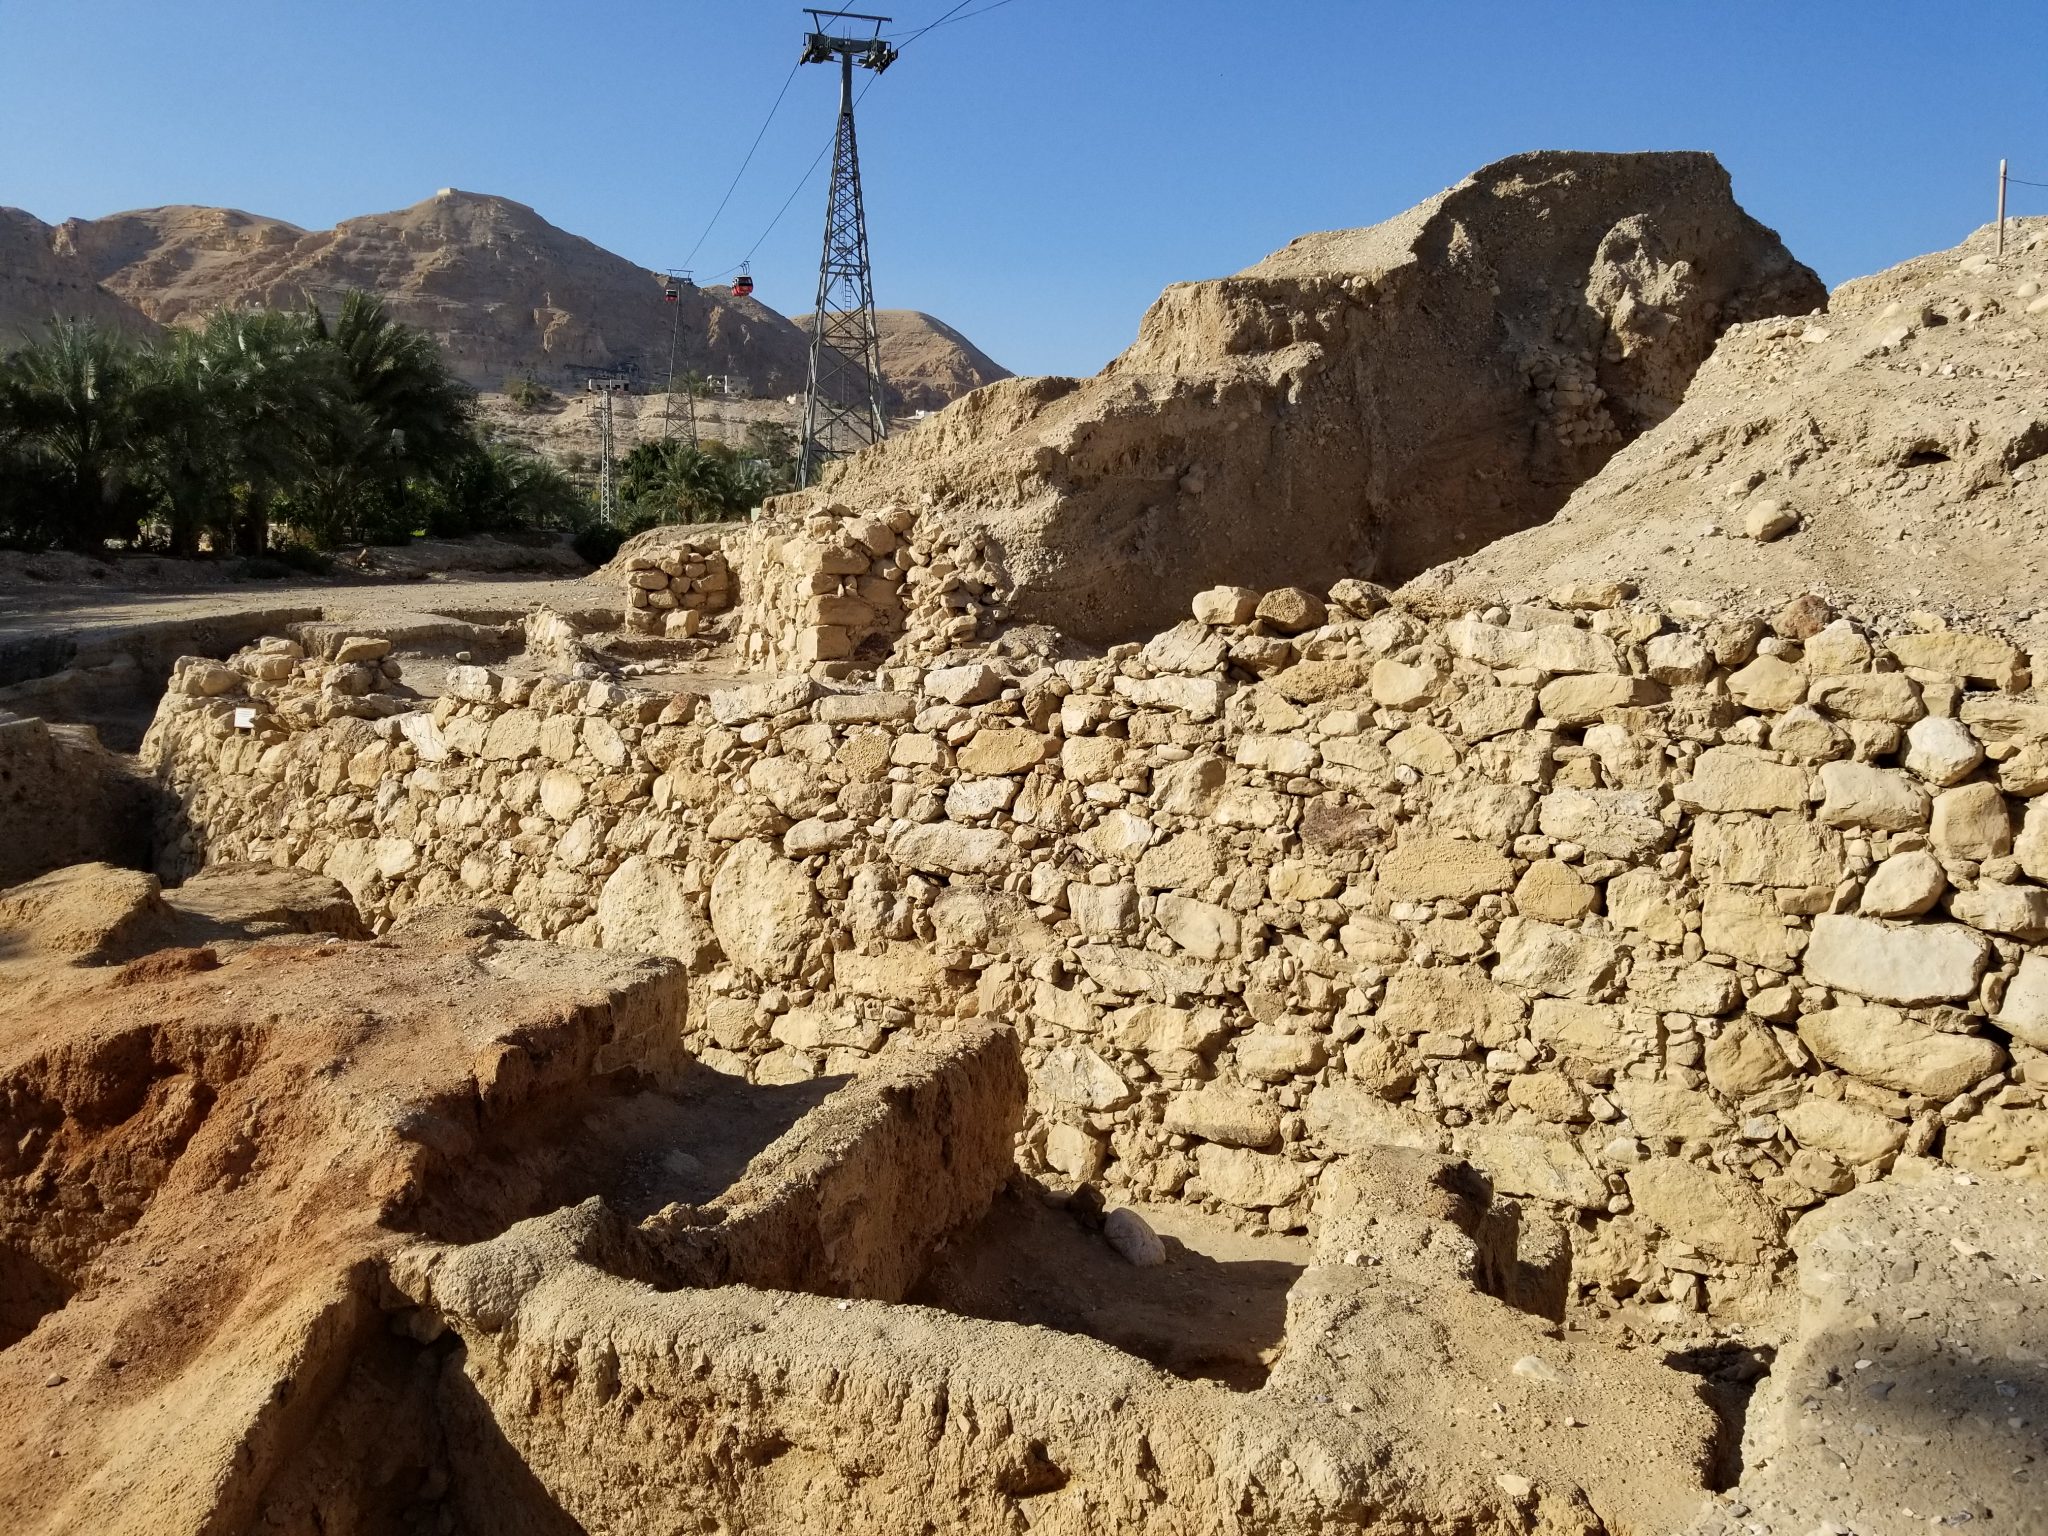 Jericho walls.  Archaeologists have dated these walls to a period later than when the Israelites conquered Jericho.